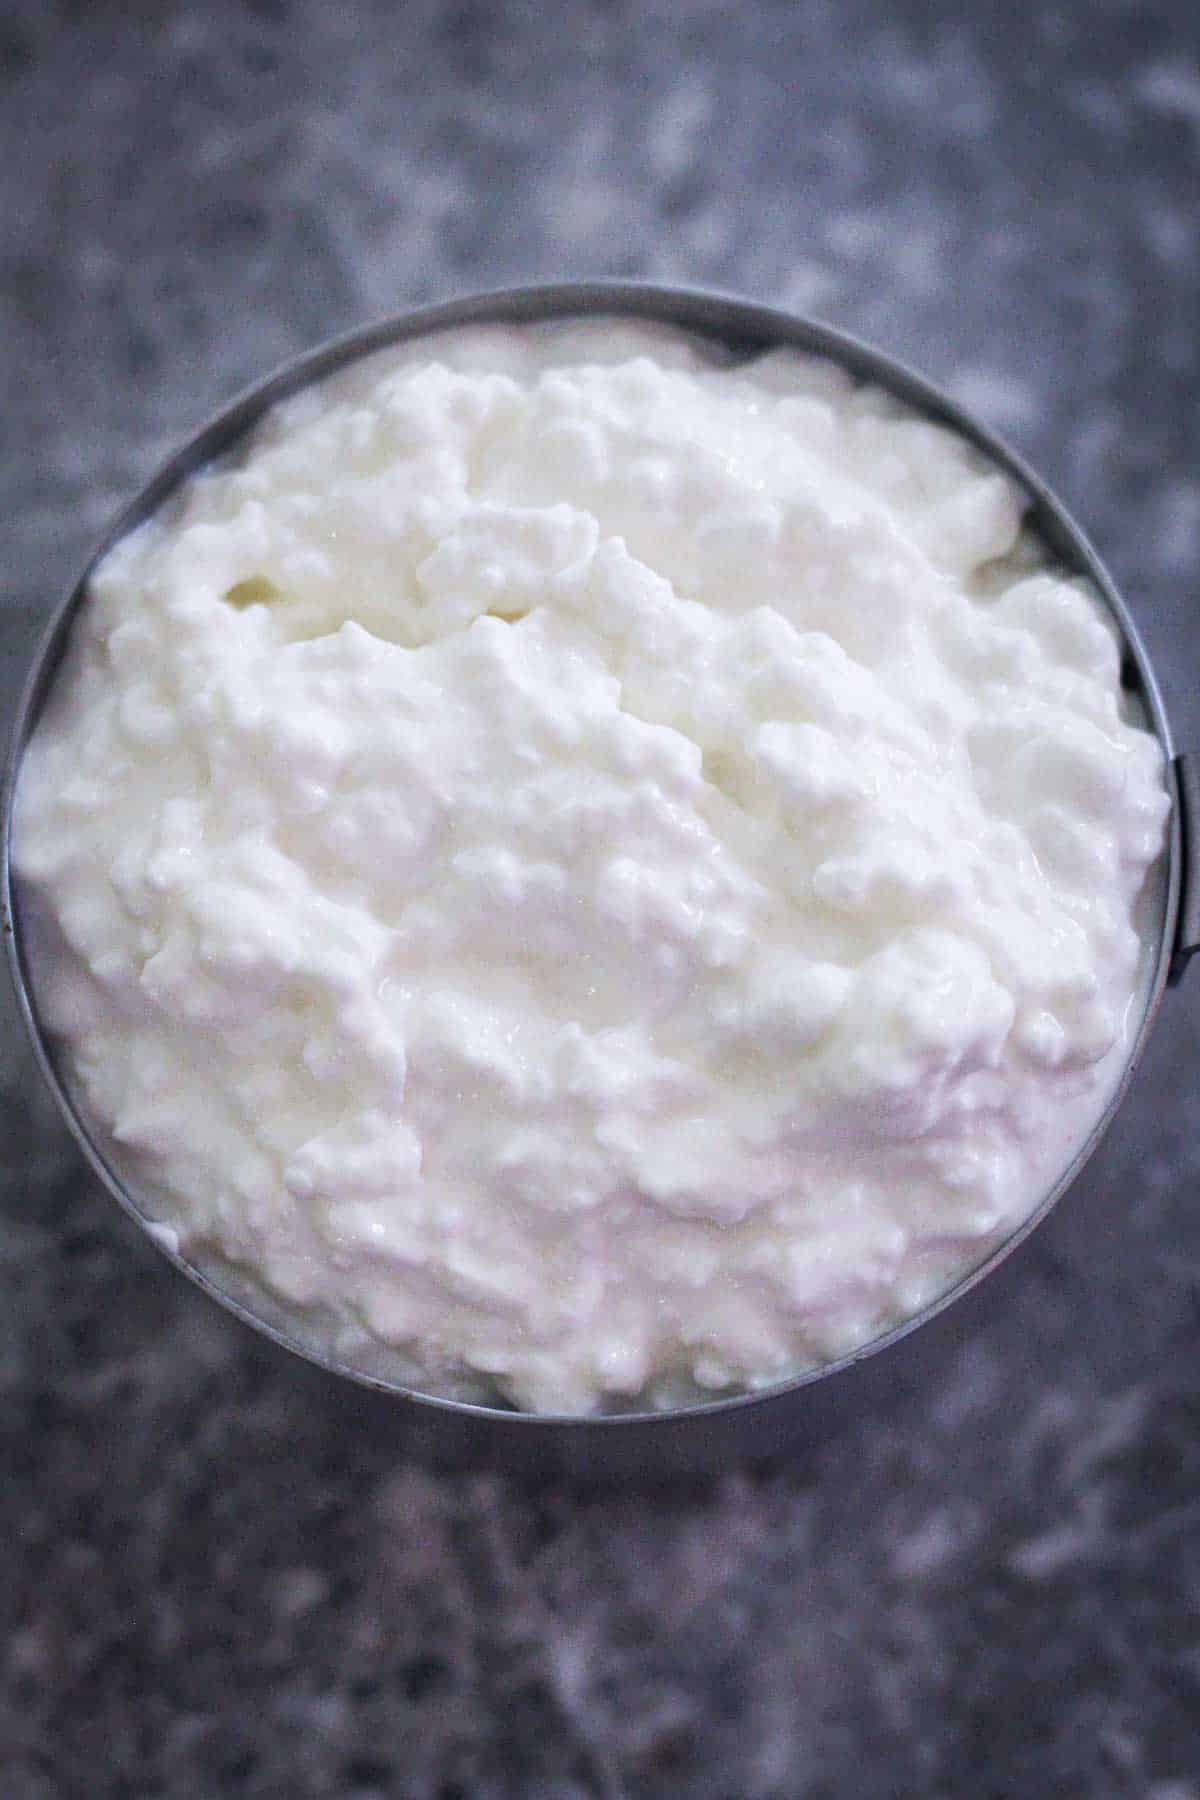 Cottage cheese on a measuring cup, close up view.